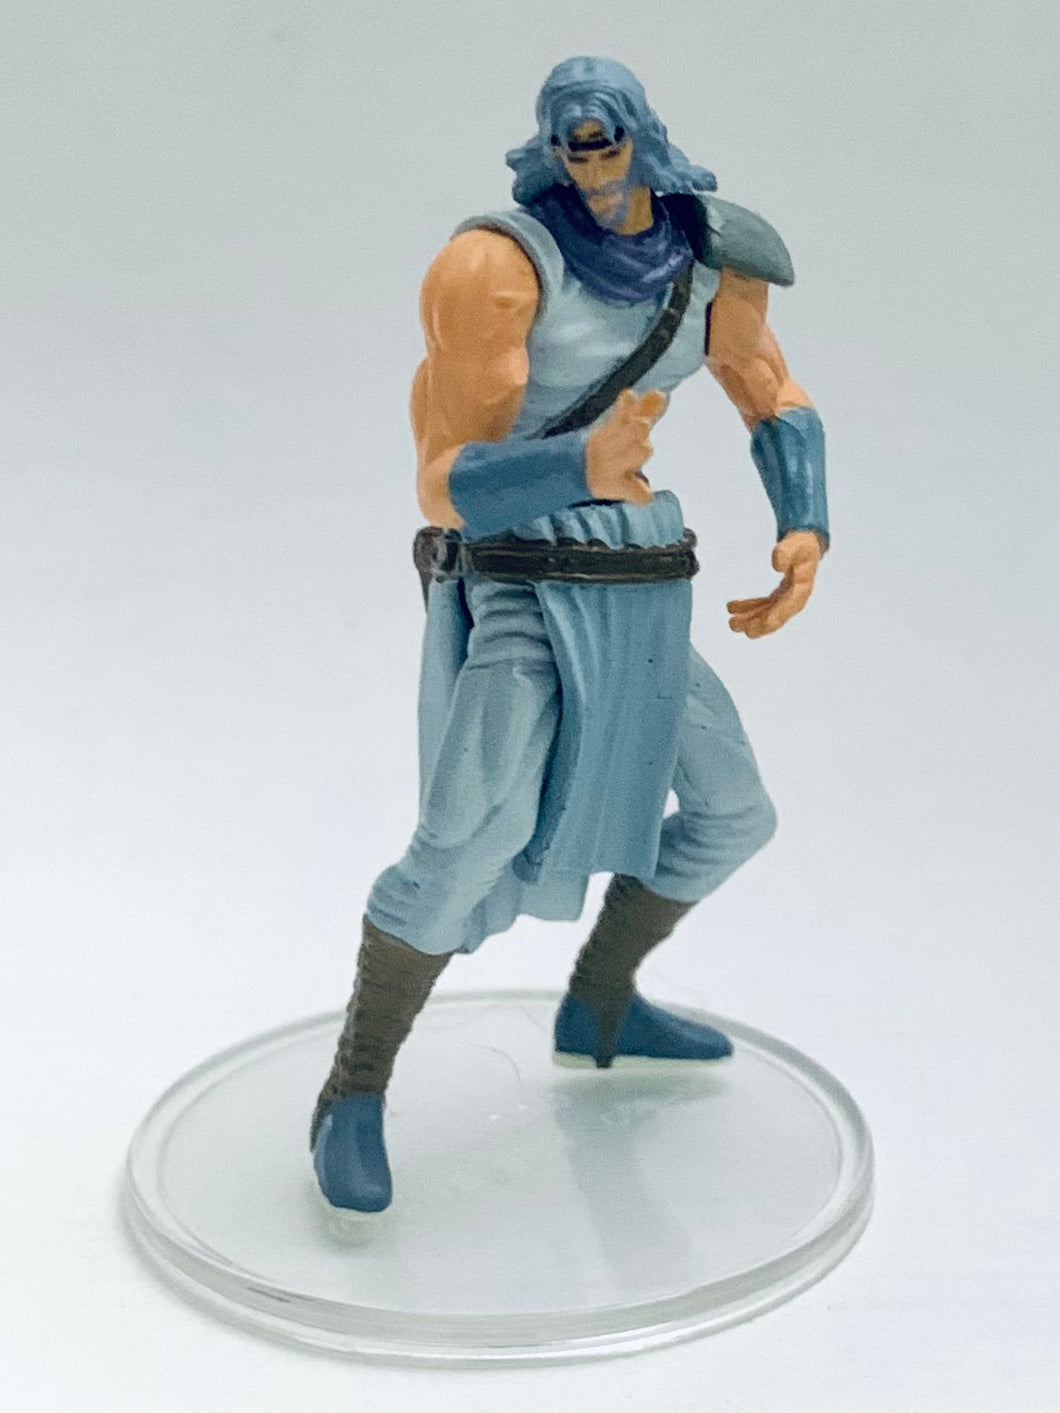 Hokuto no Ken - Toki - Fist of the North Star All-Star Retsuden Capsule Figure Collection Part 1